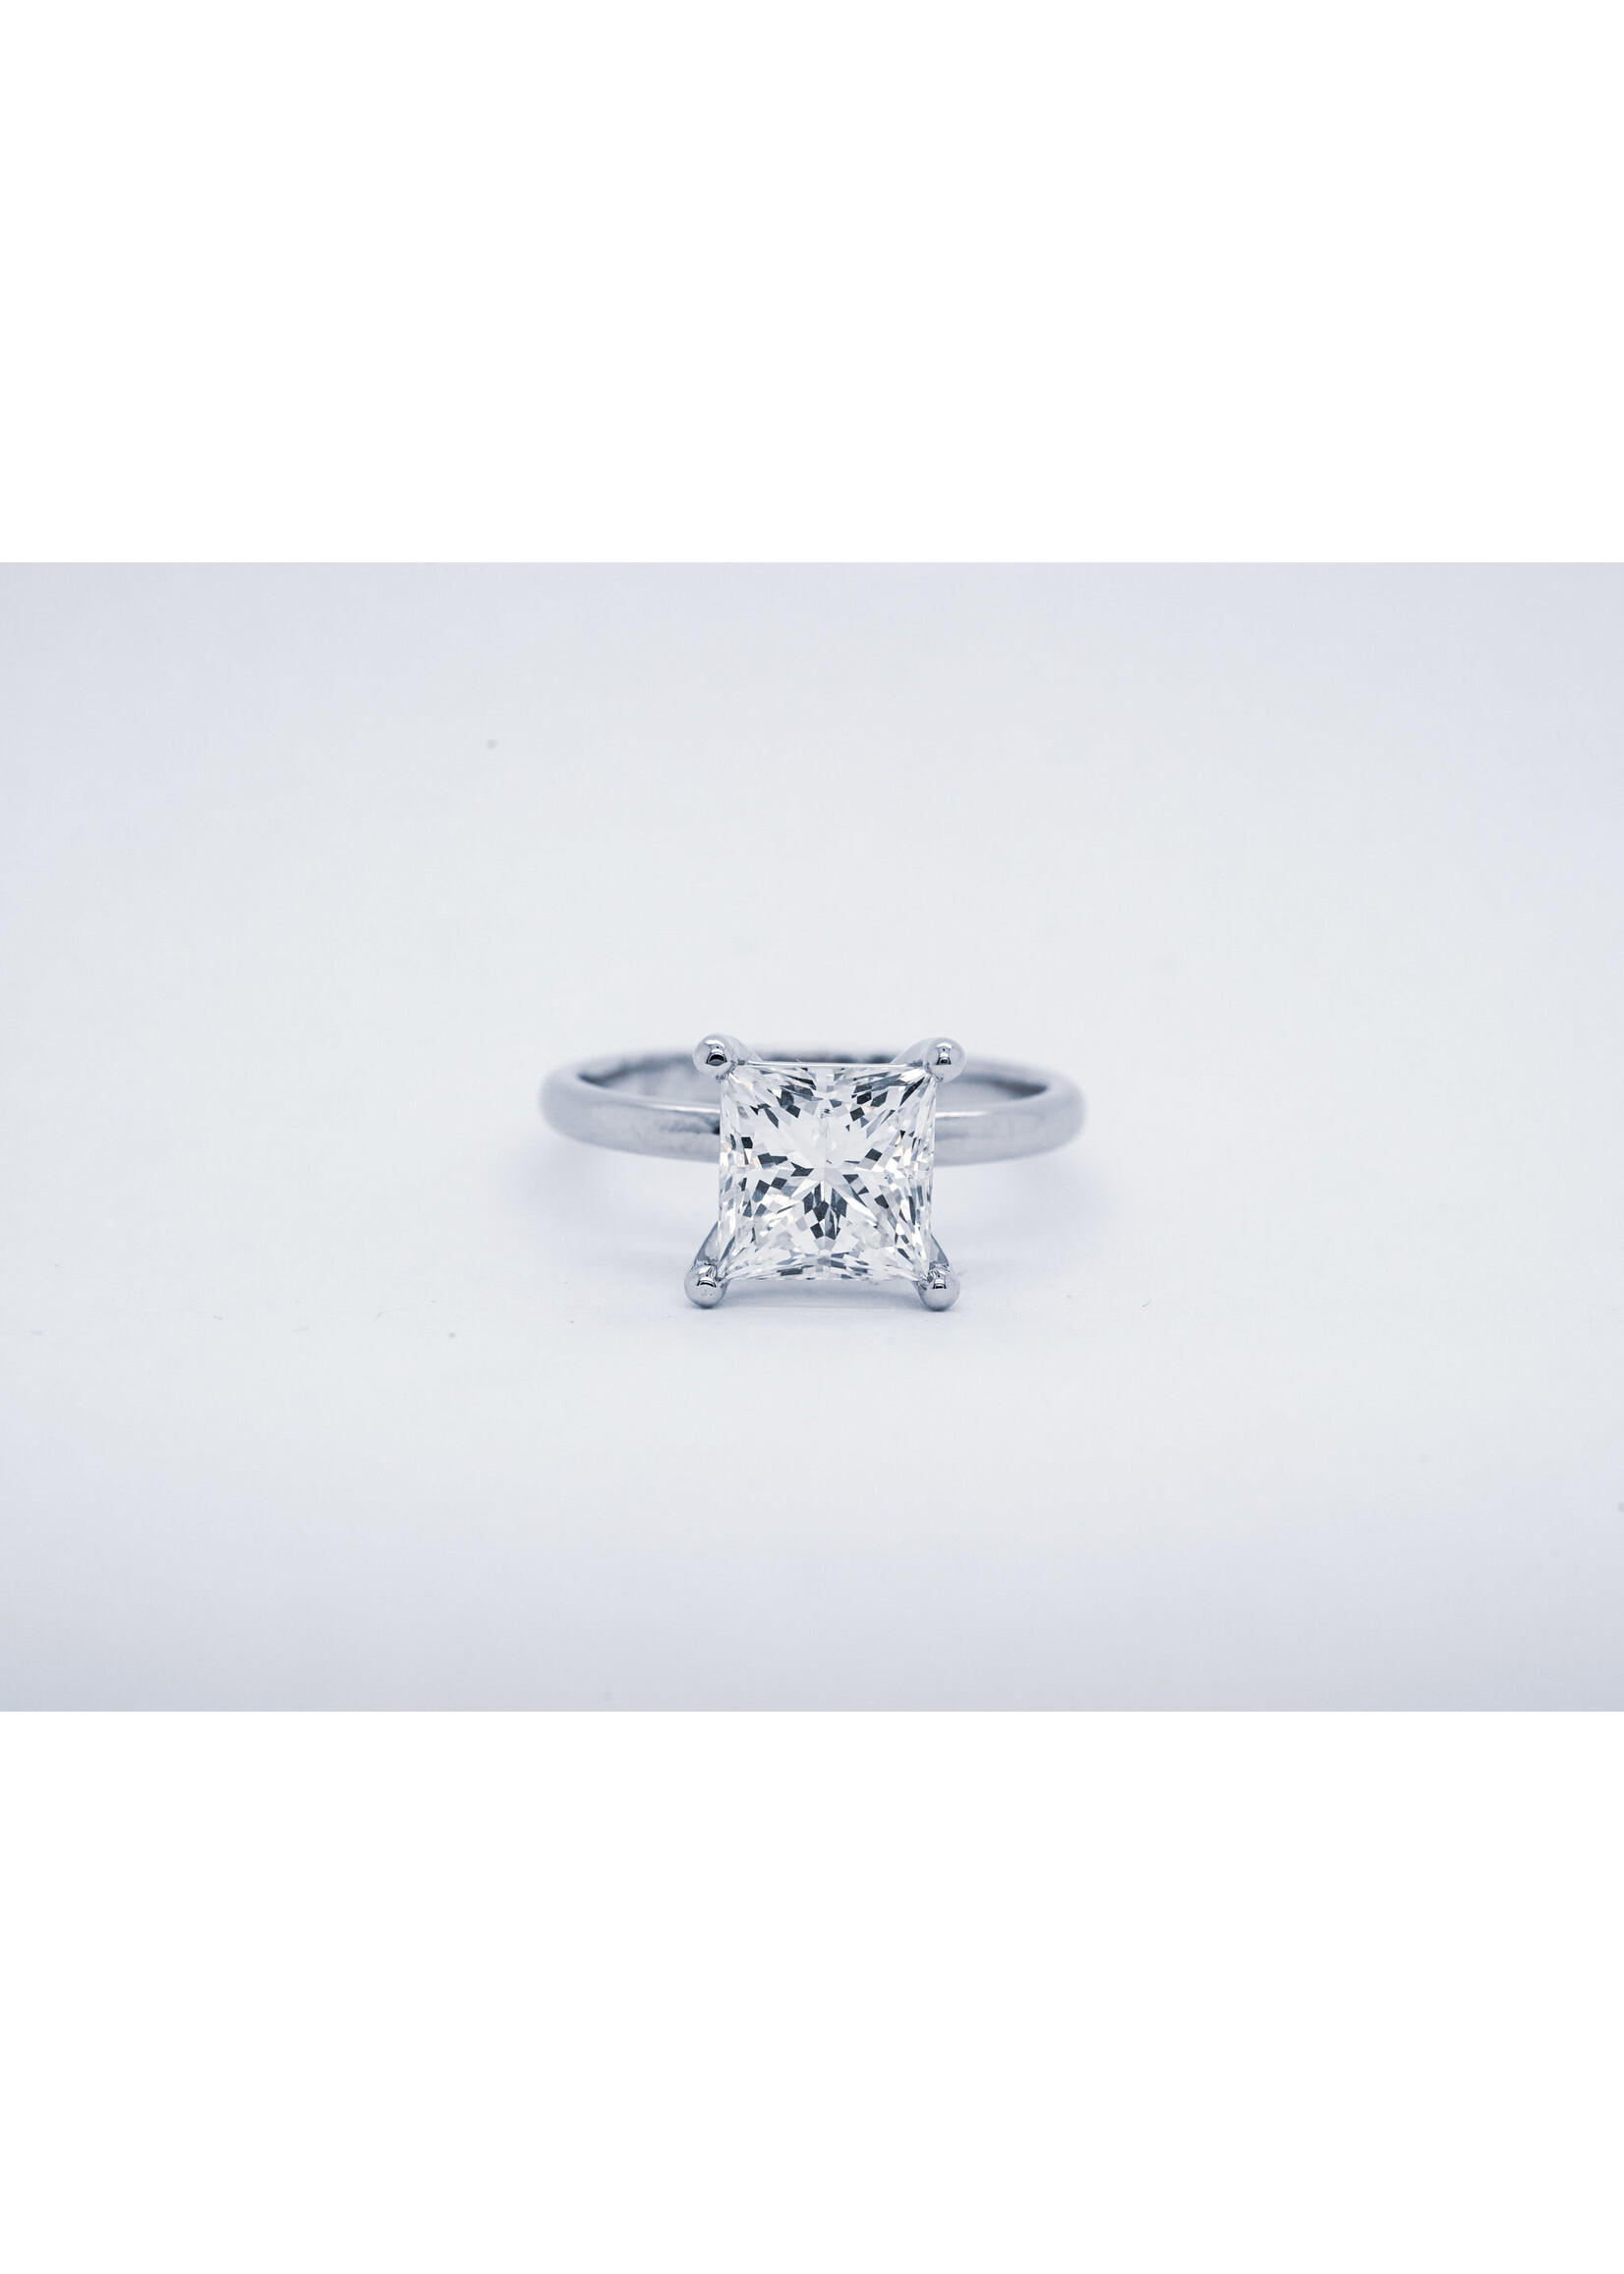 LETT- 14KW 4.05g 3.07ct I/SI2 Princess Cut Diamond Solitaire Engagement Ring (size 7.25)